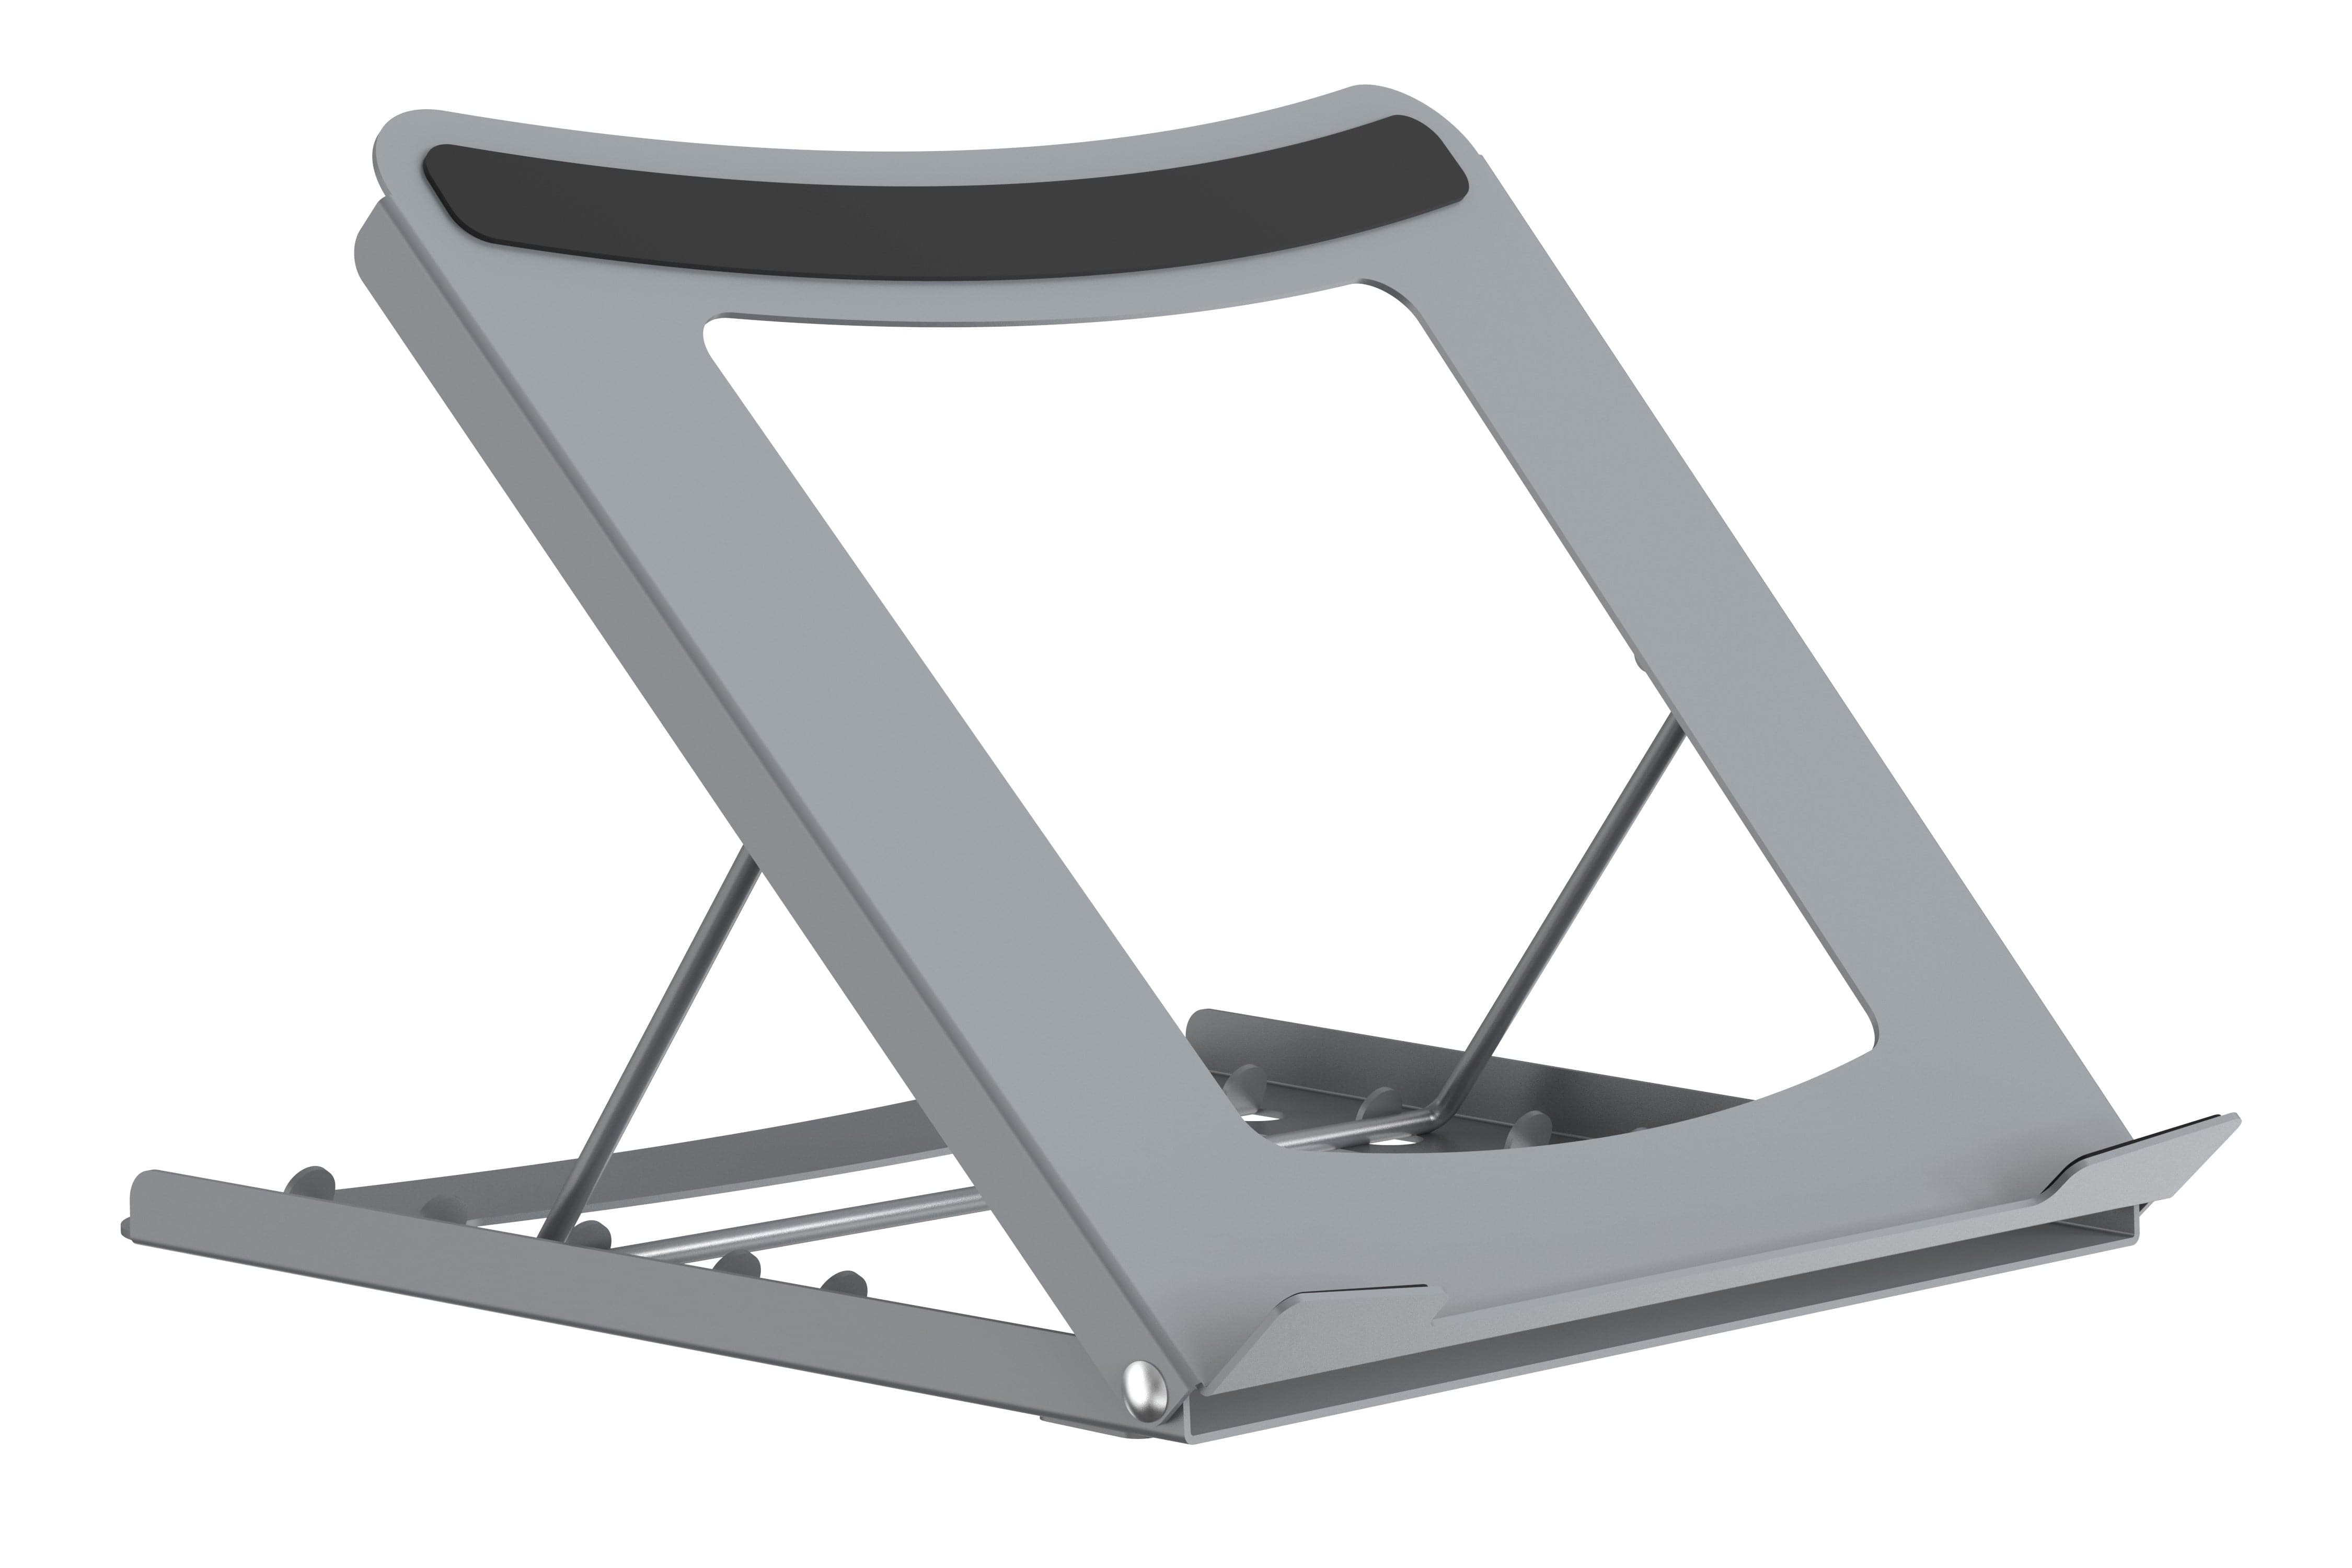 ProperAV Steel Construction Laptop or Tablet Stand with 5 Adjustable Settings (Silver)